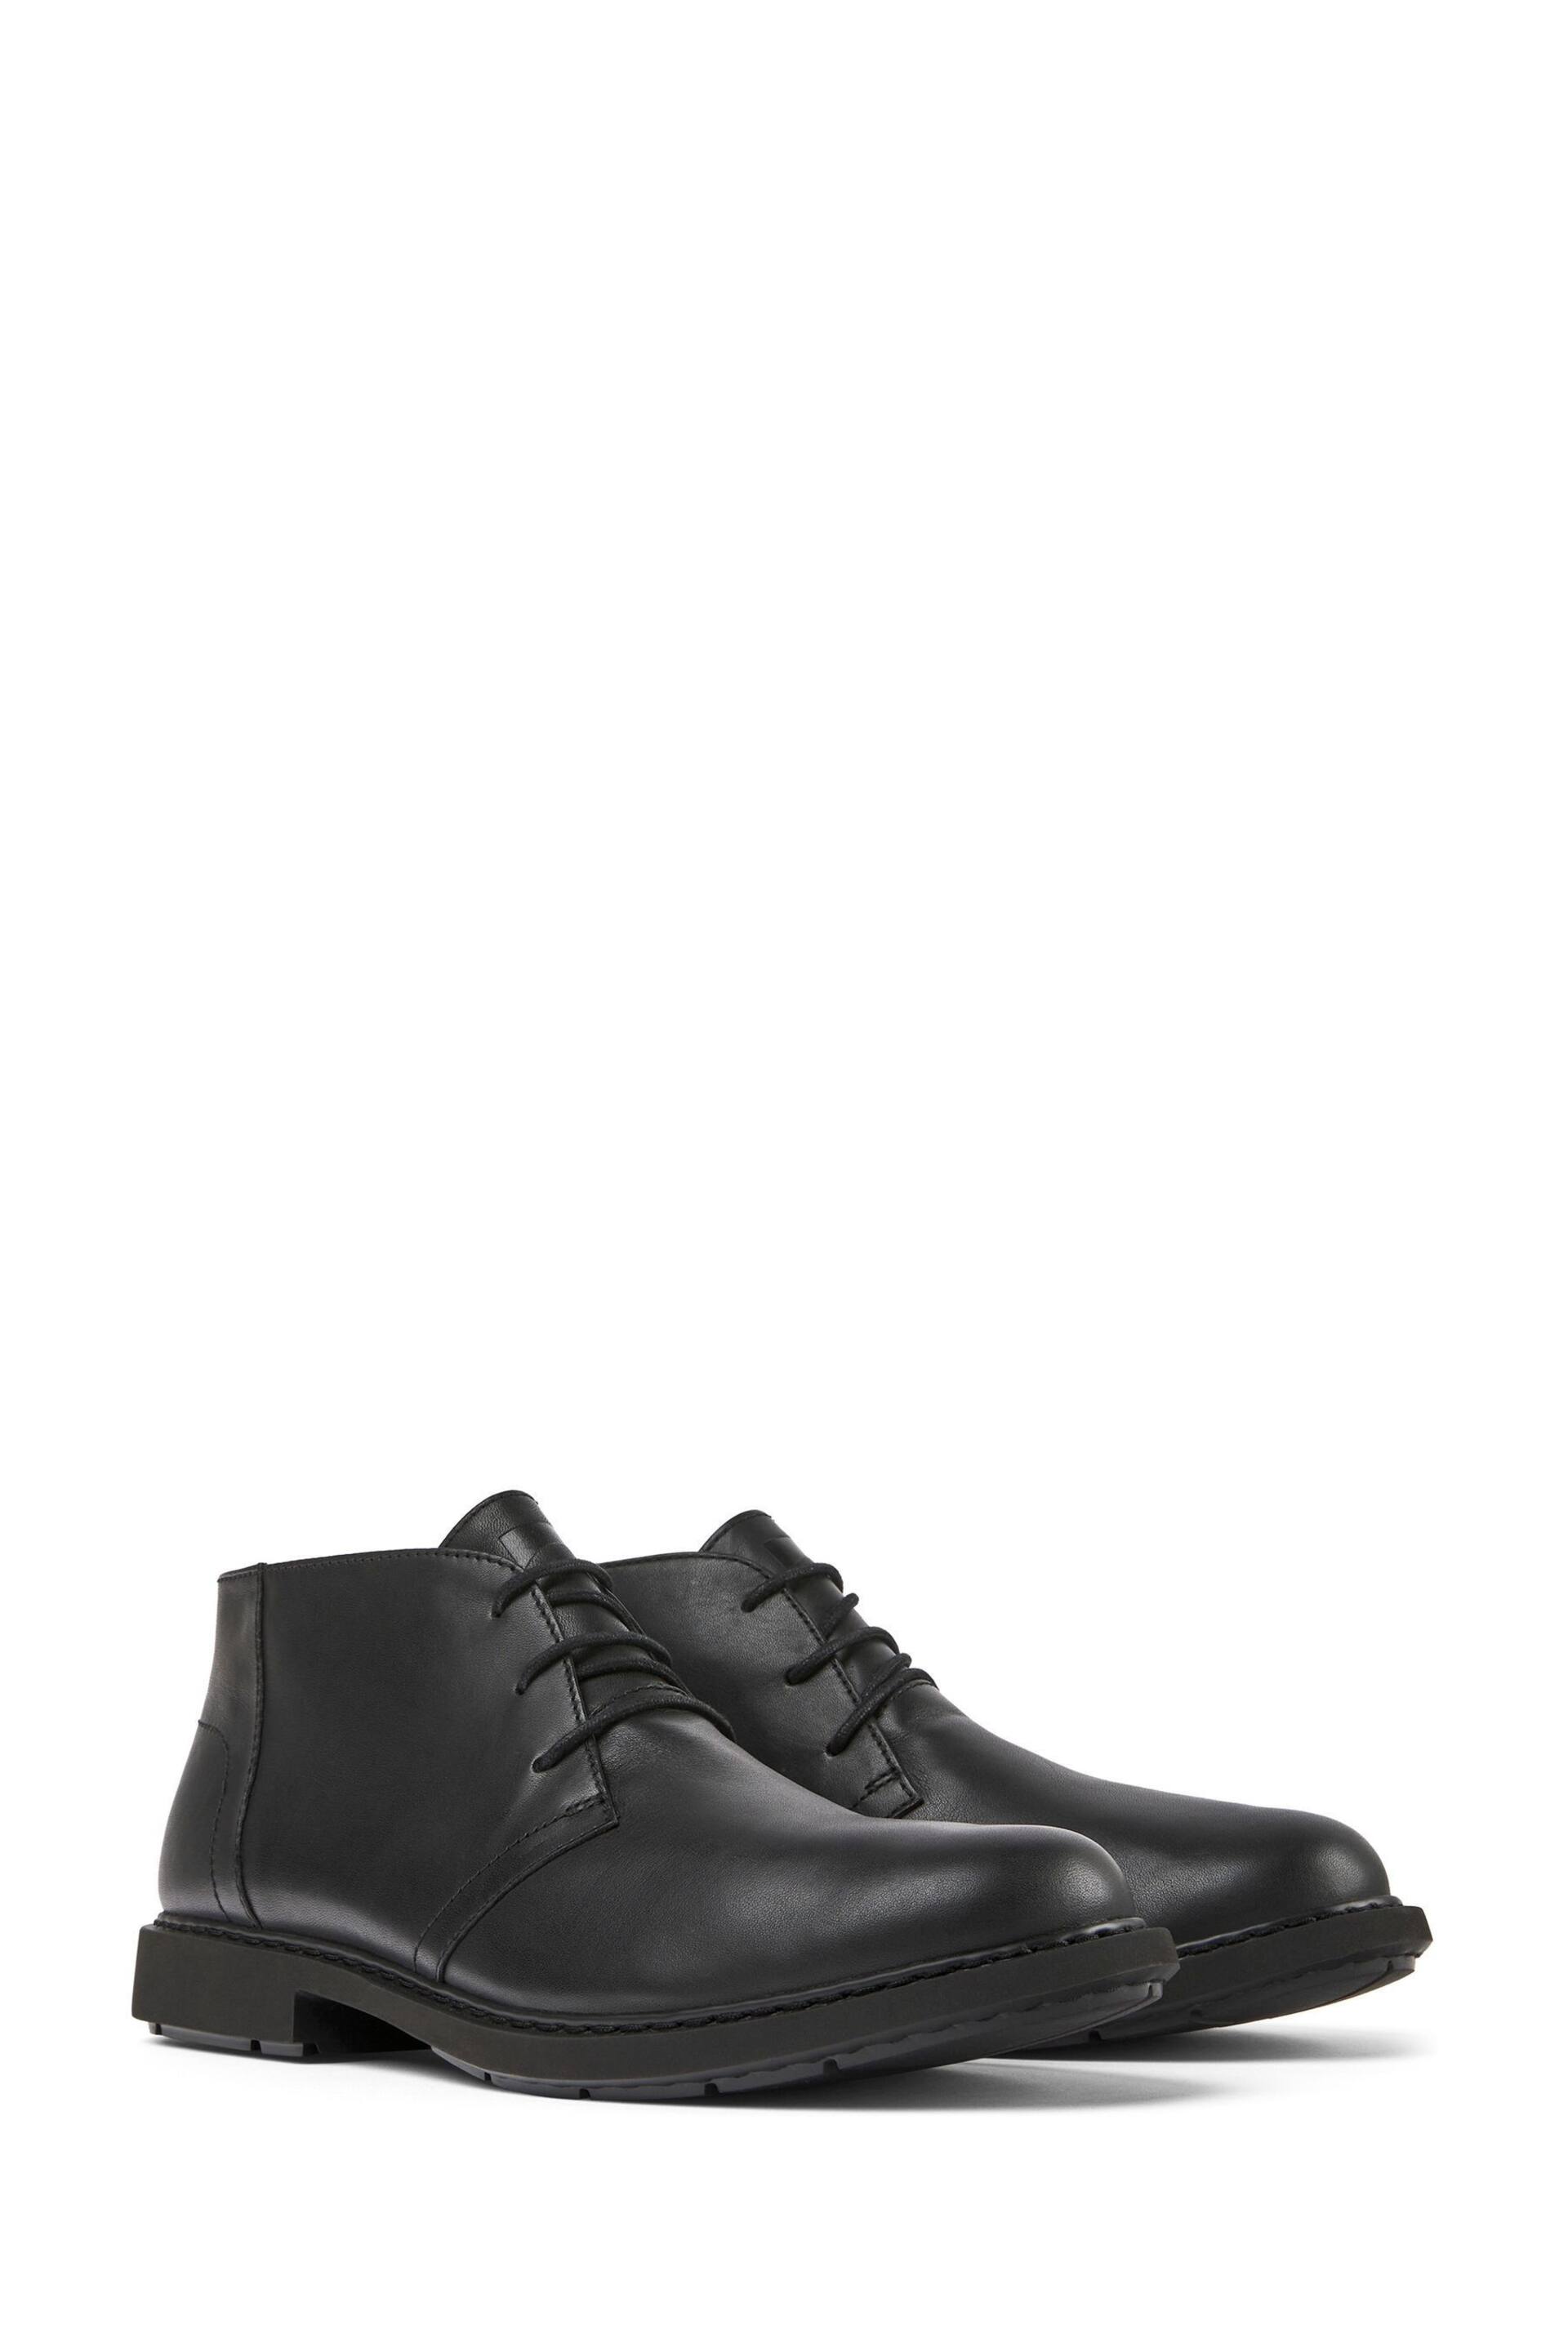 Camper Mens Neuman Leather Ankle Black Boots - Image 2 of 5